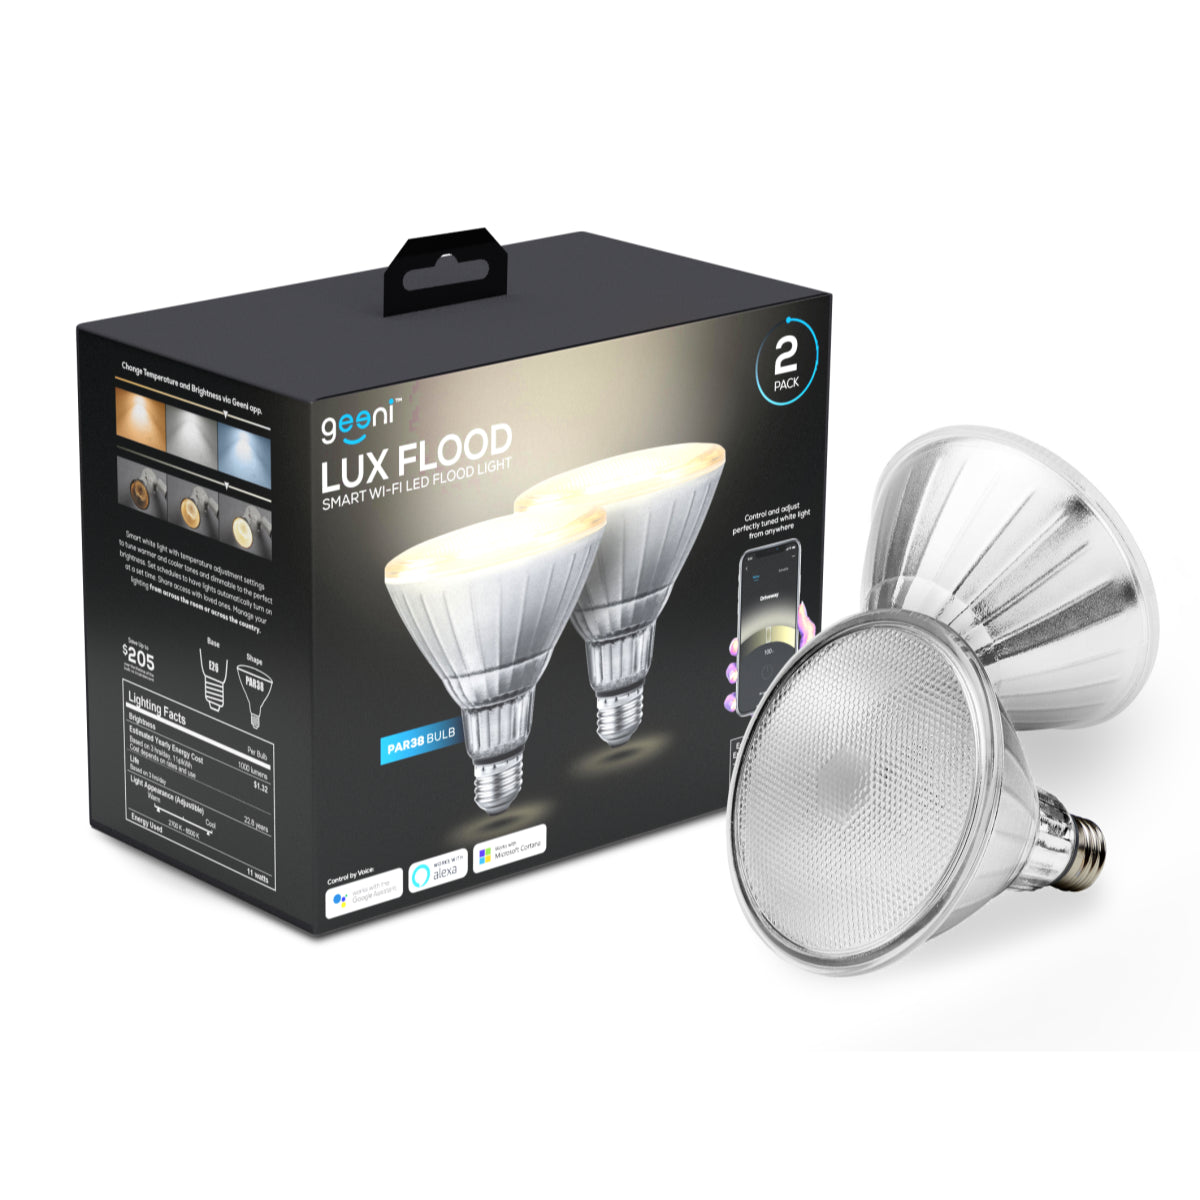 Geeni LUX Flood 75W Equivalent White Tunable Dimmable PAR38 E26 Smart LED Bulb (2-Pack)